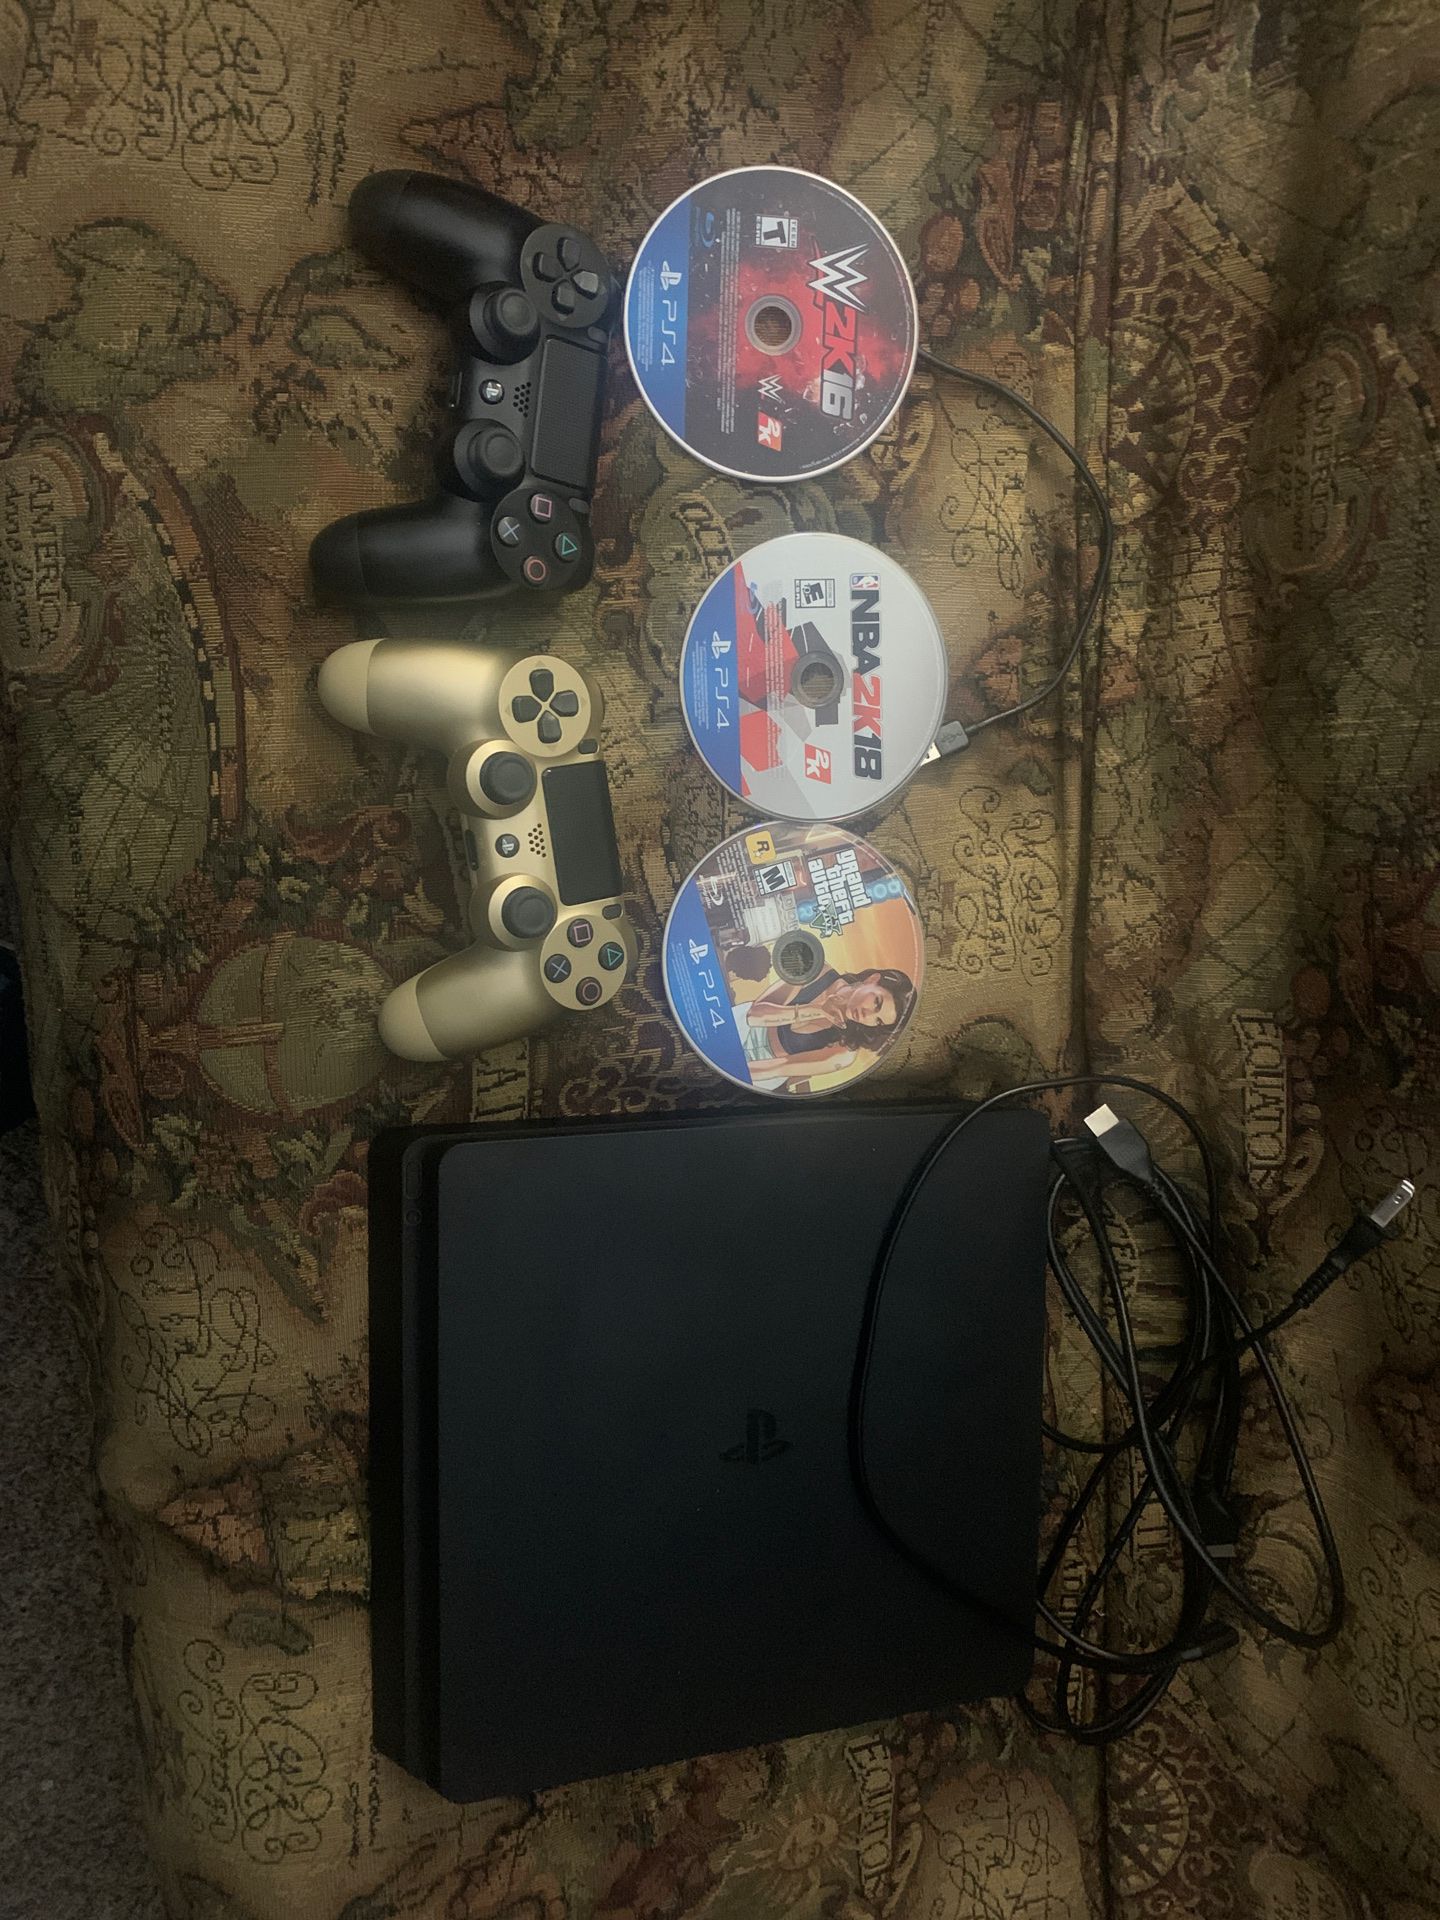 PS4 barley used for it from Costco, 2 controllers and a few games